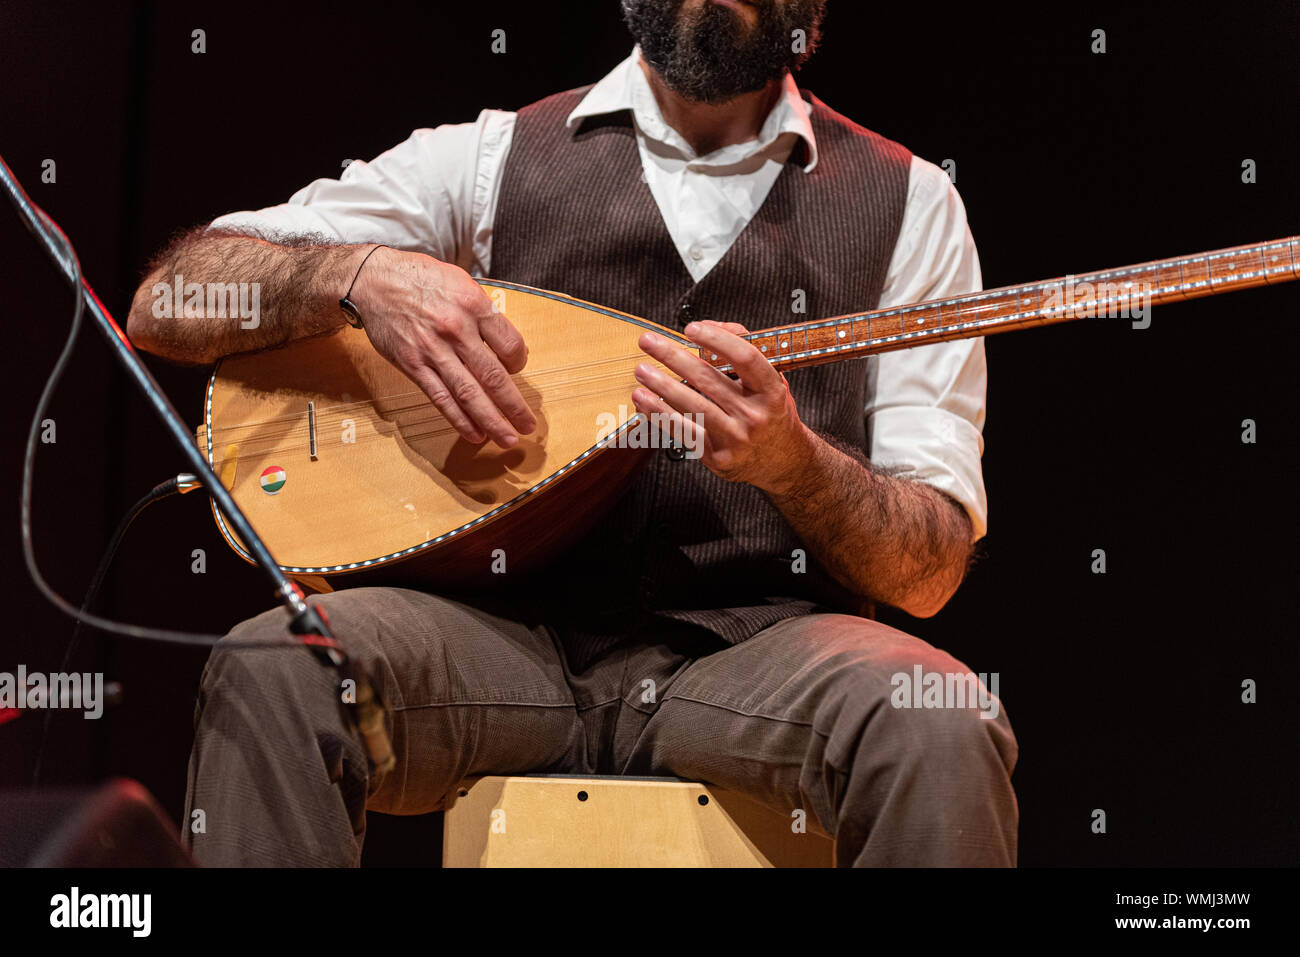 Good-looking man with a thick black beard, hands details of a musician playing a typical stringed instrument on stage, the tembur or saz Stock Photo